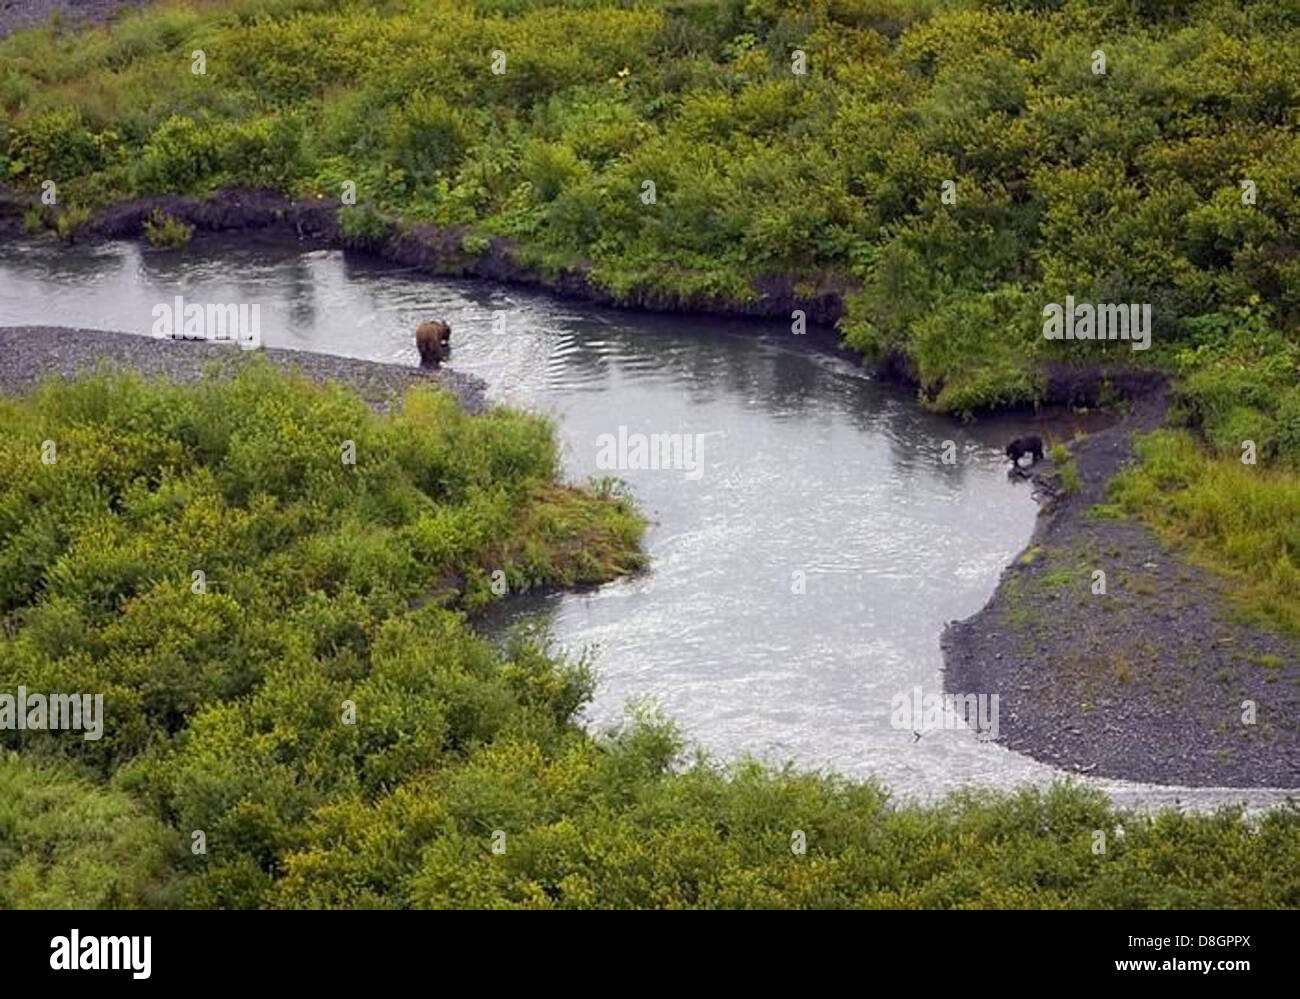 Brown bear and black bear in the upper Russian river. Stock Photo